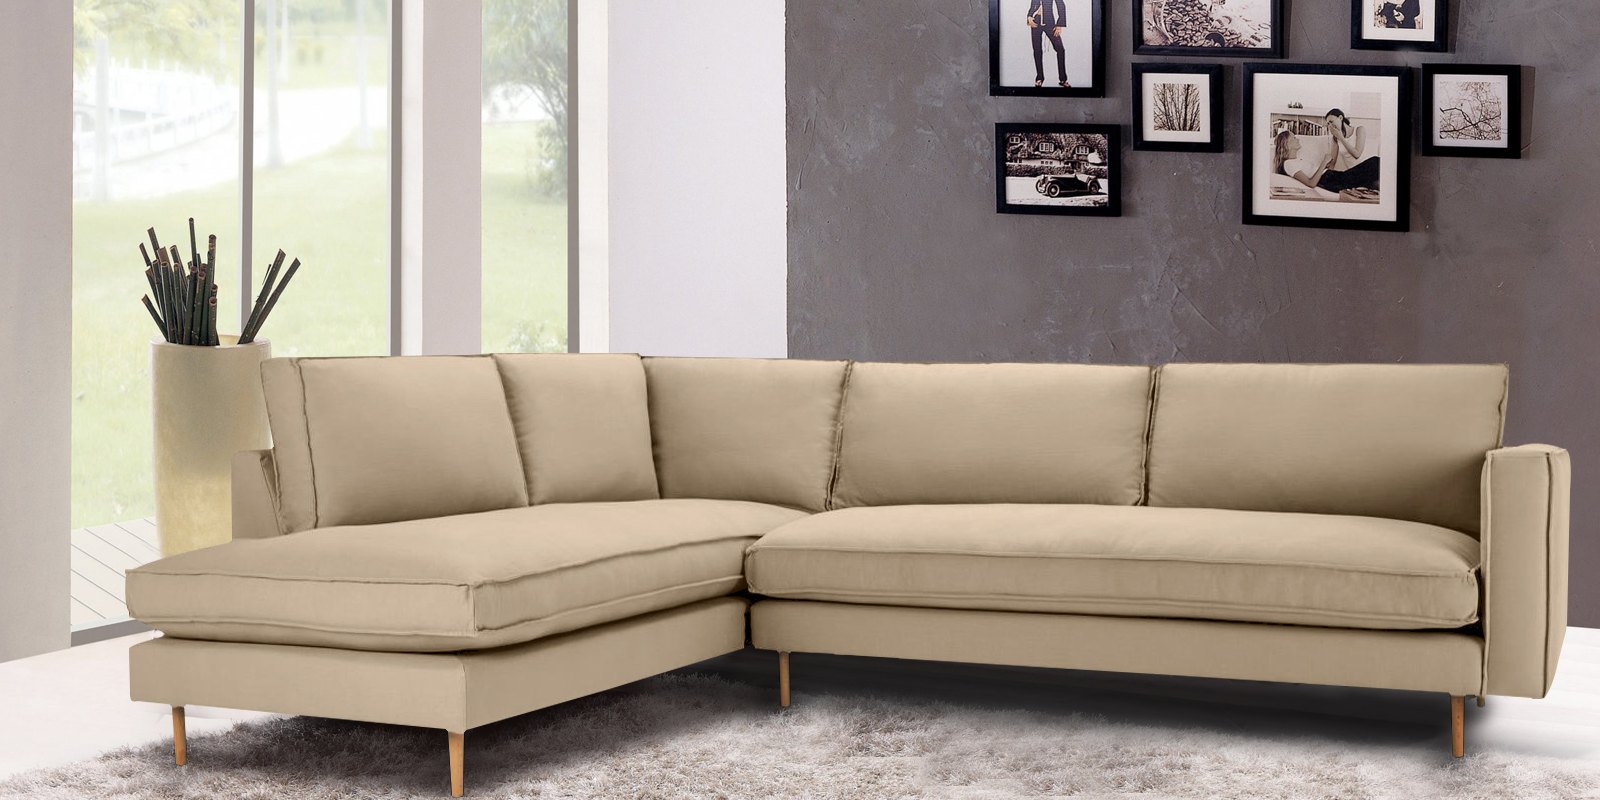 Modular RHS 3 Seater Sofa with Lounger in Beige Colour - Dreamzz Furniture  | Online Furniture Shop